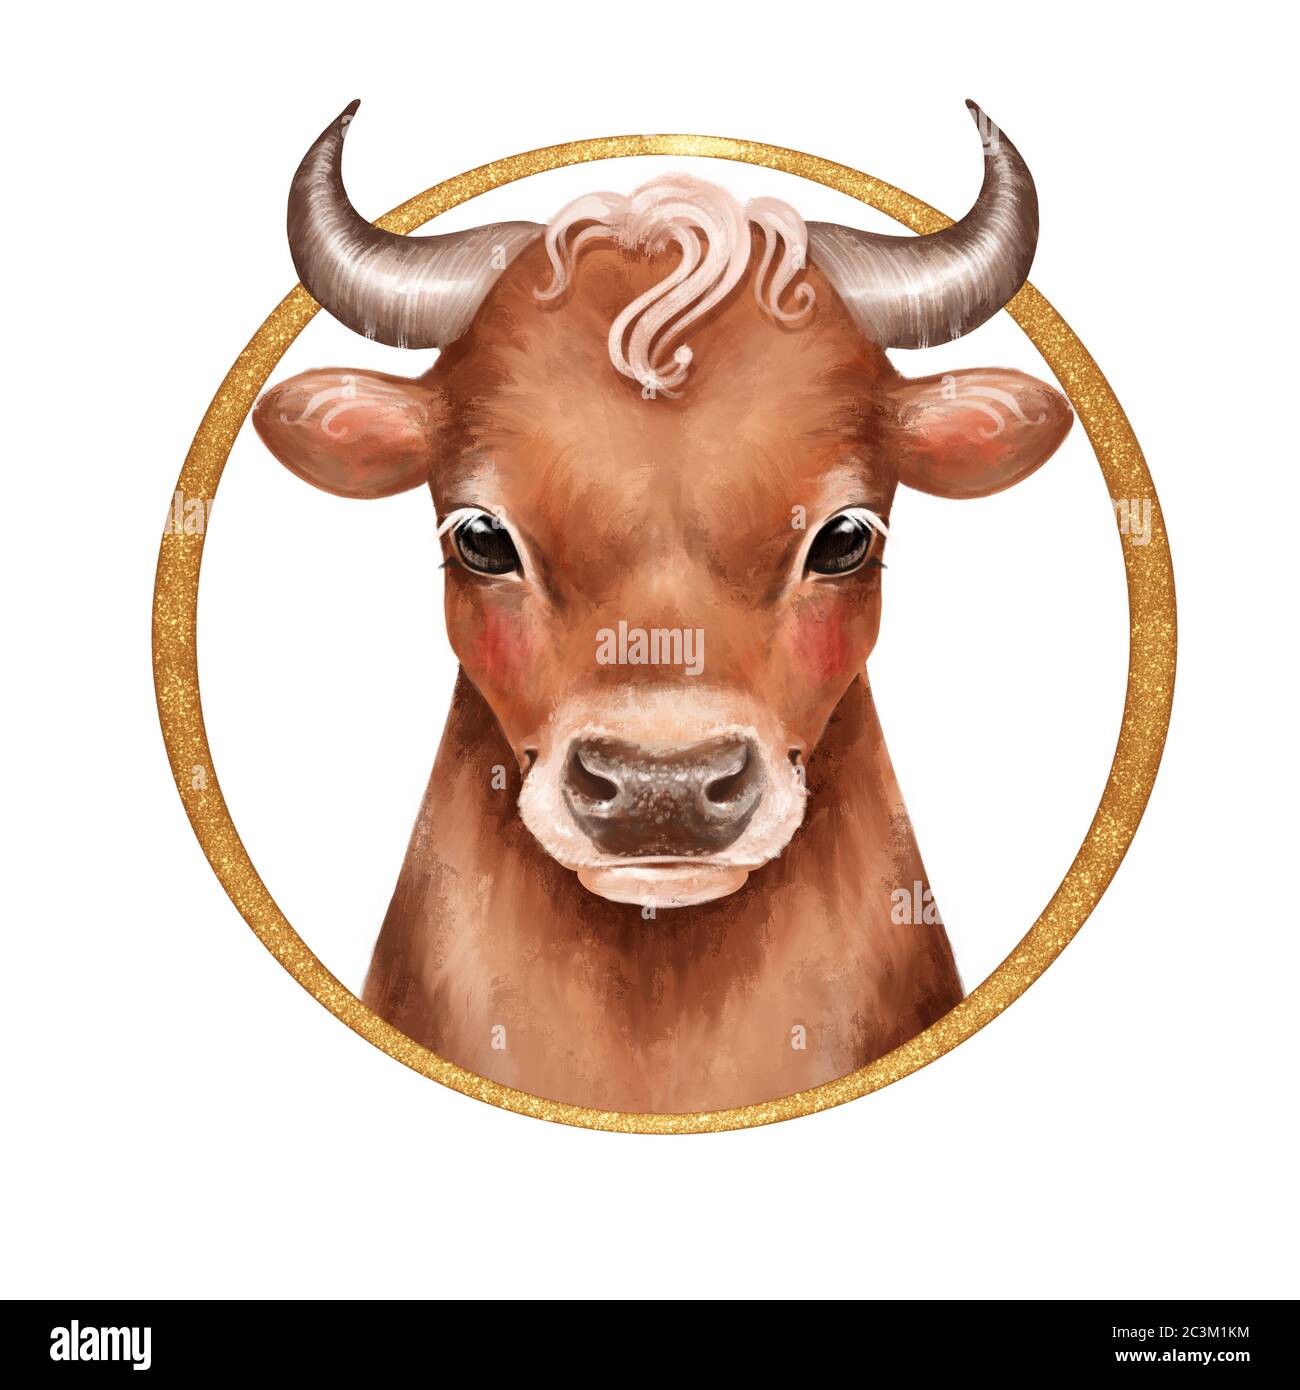 Cute llustration of Bull isolated on white background Stock Photo